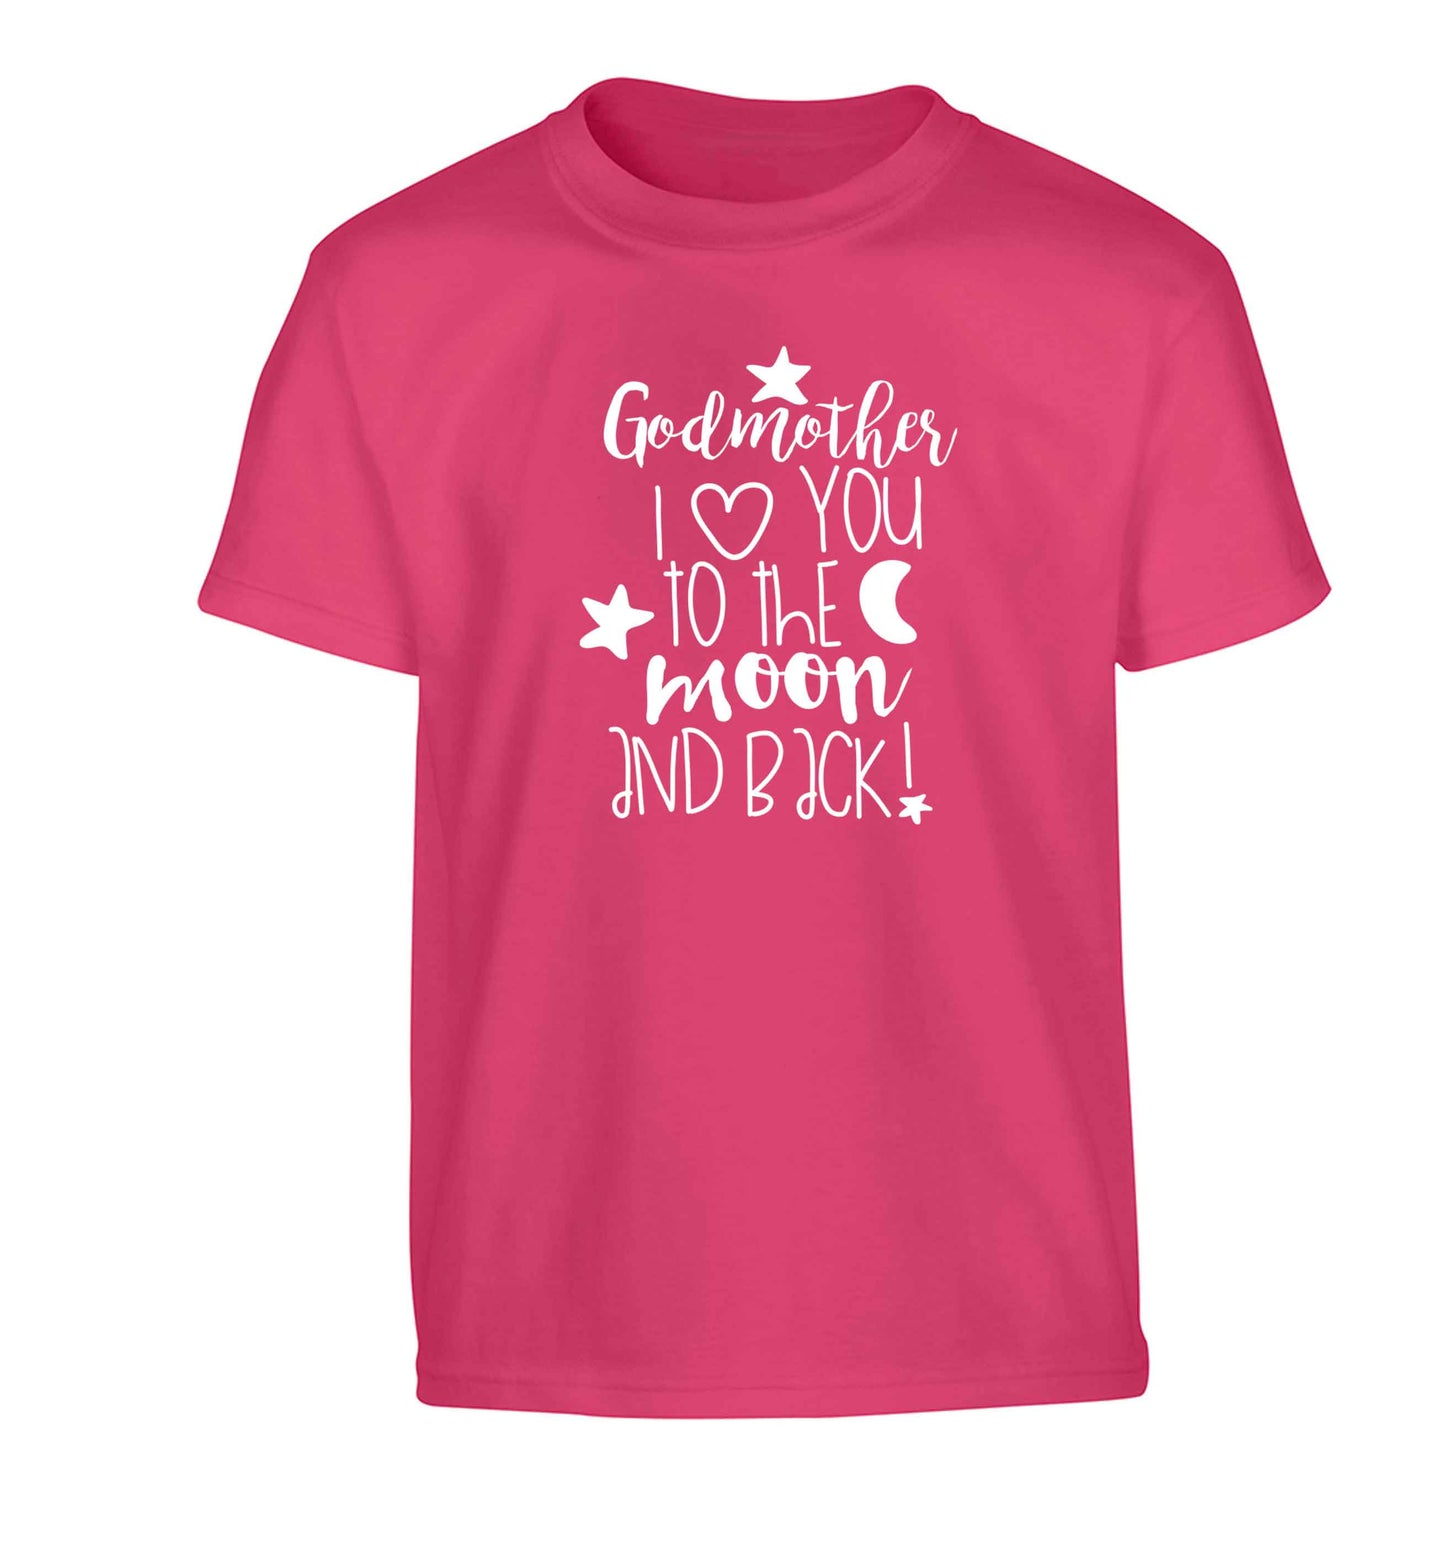 Godmother I love you to the moon and back Children's pink Tshirt 12-13 Years